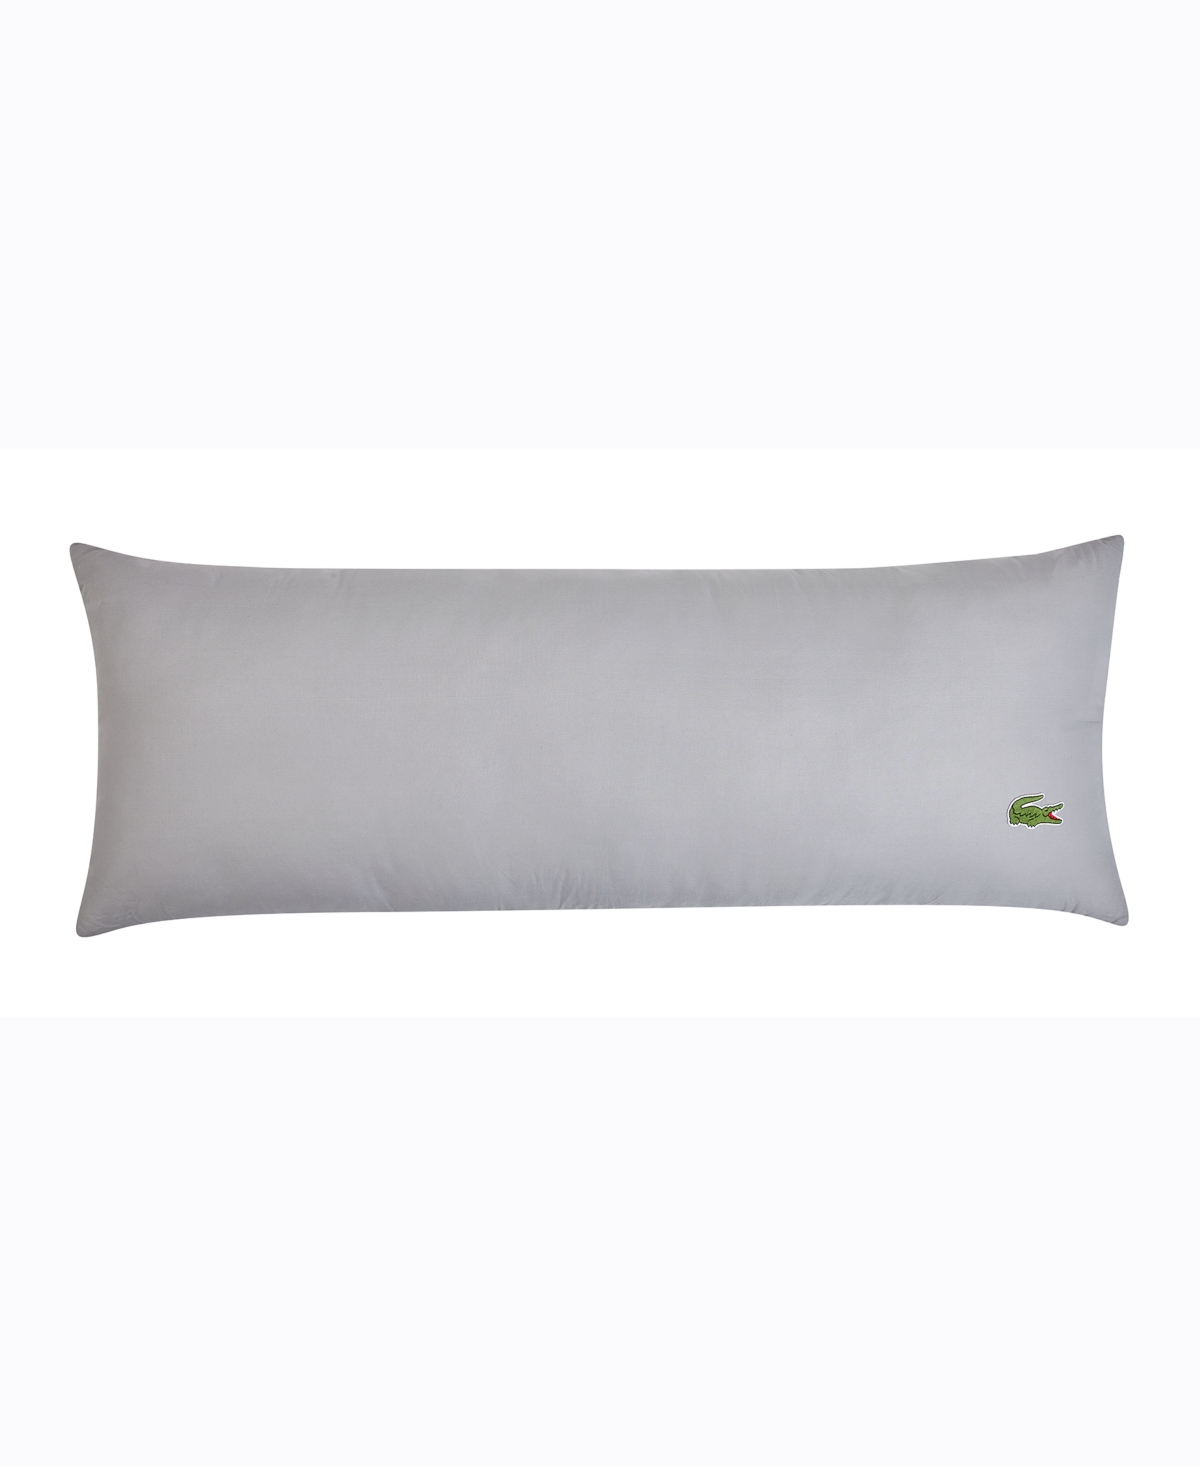 Lacoste Home Body Pillow Bedding In Gray